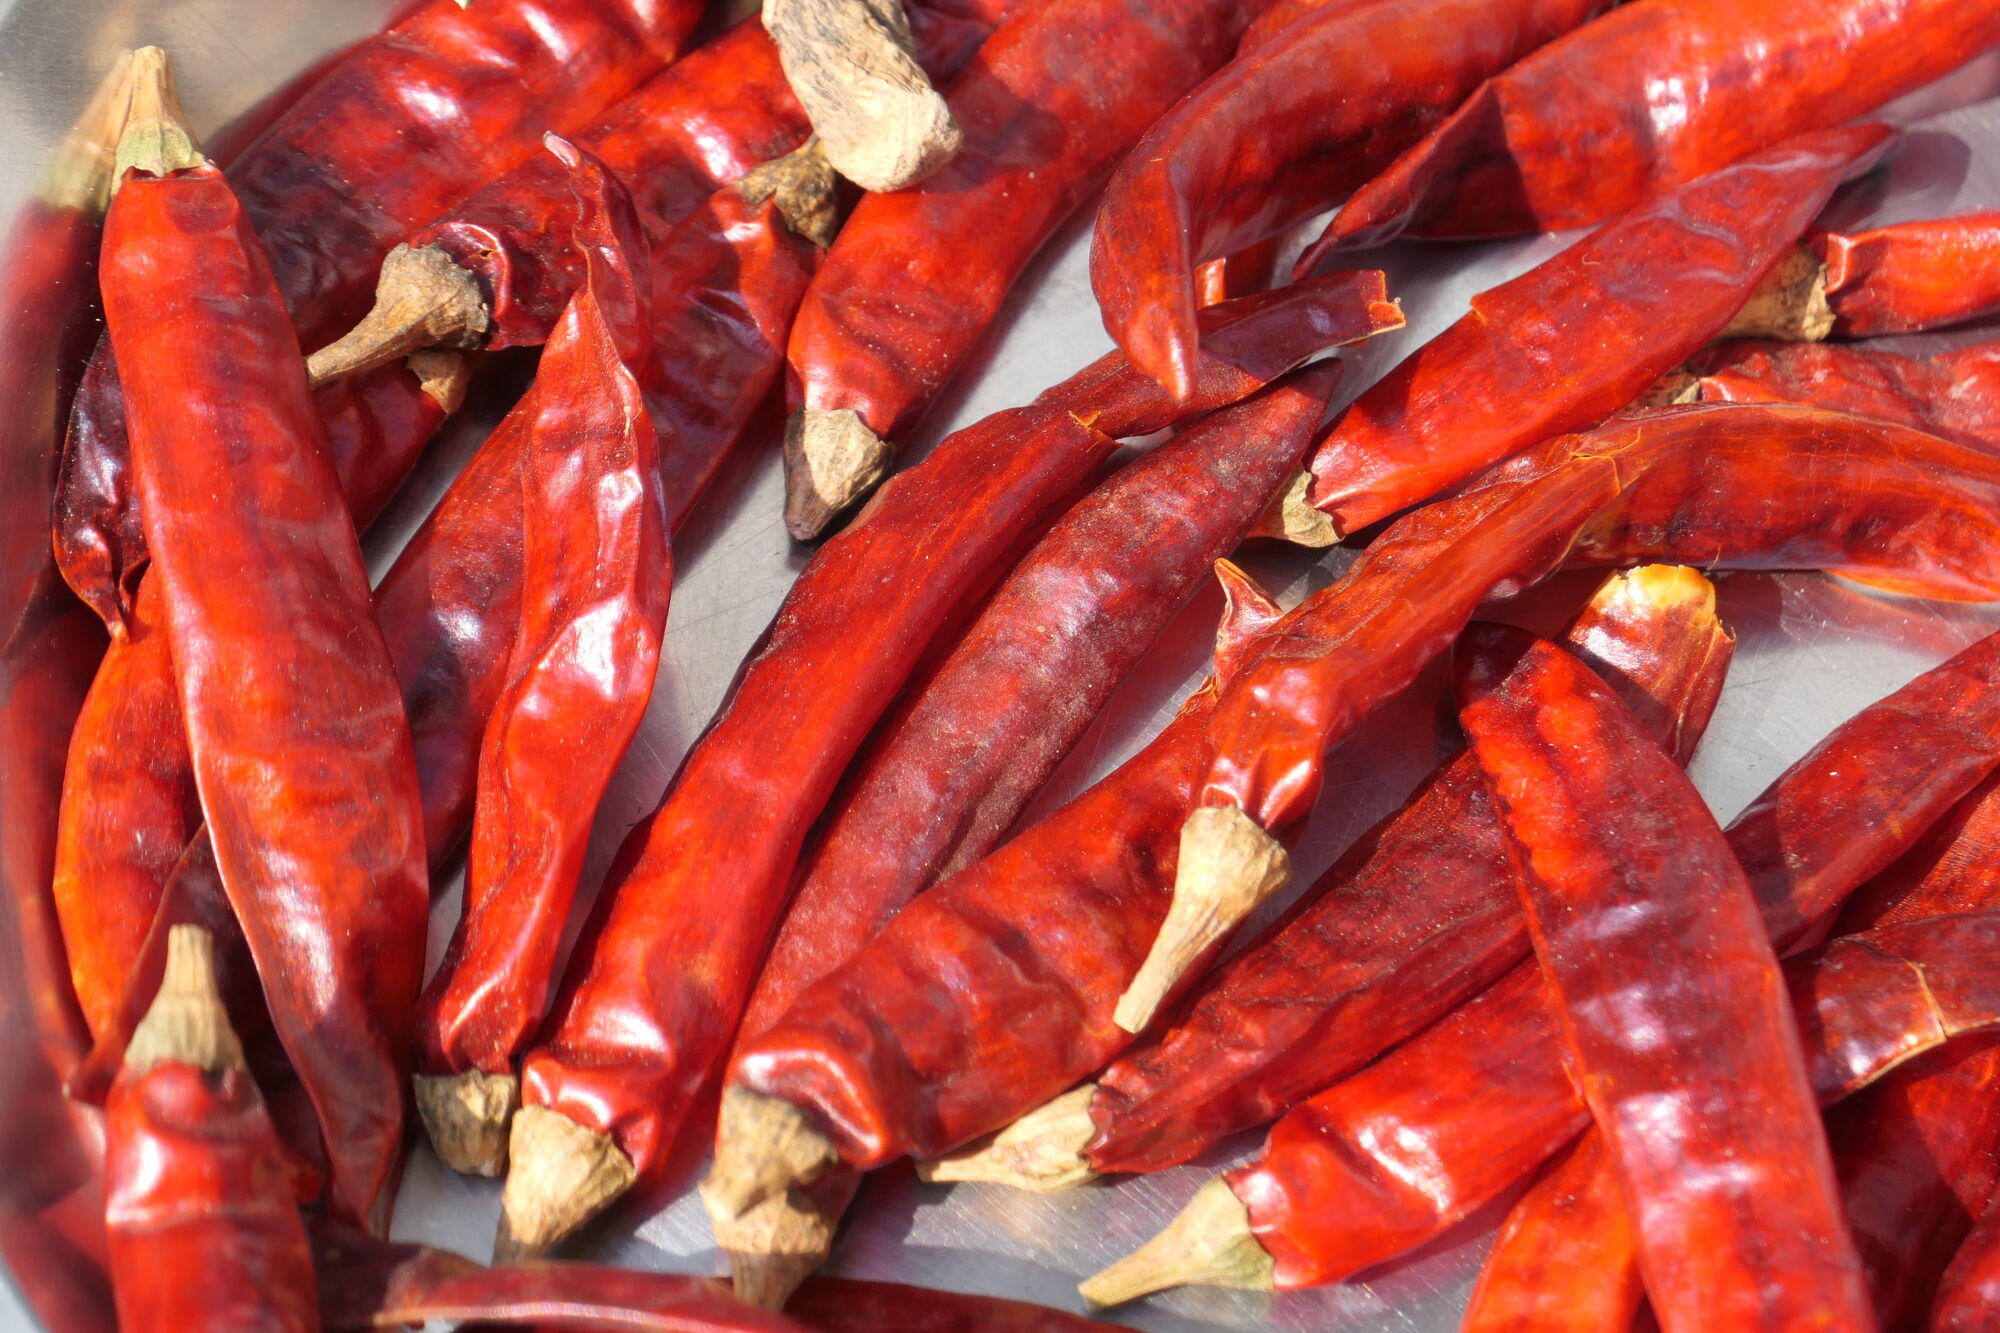 Picture of red chillies taken with Panasonic Lumix DC-Z200